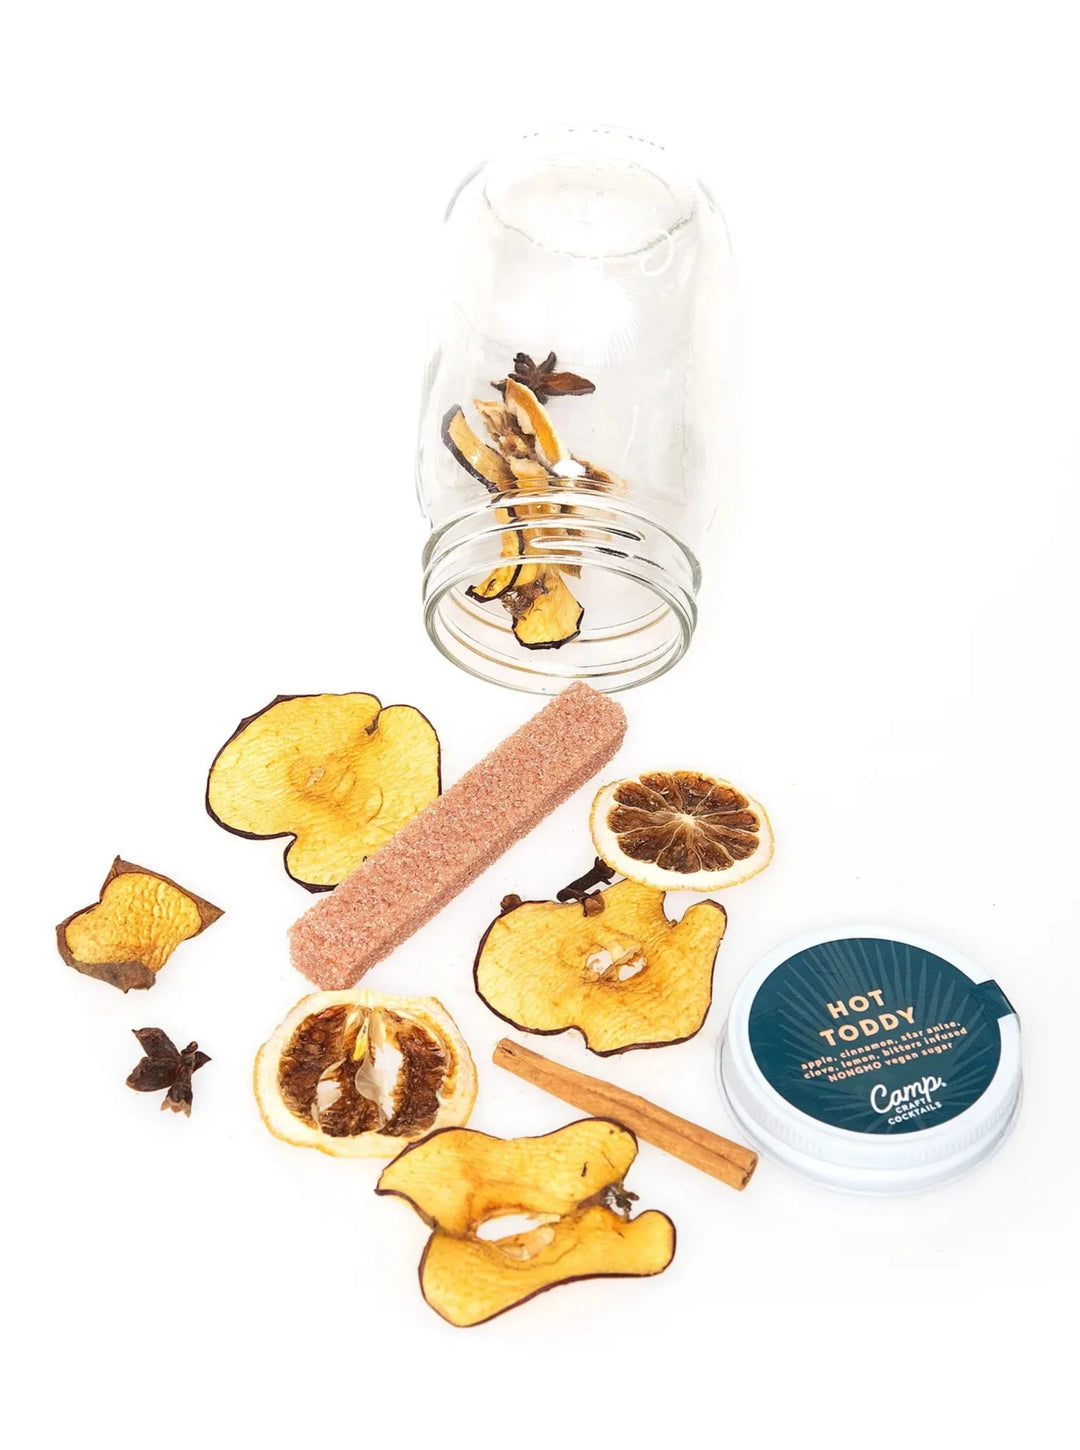 Craft Cocktail Kit - Hot Toddy